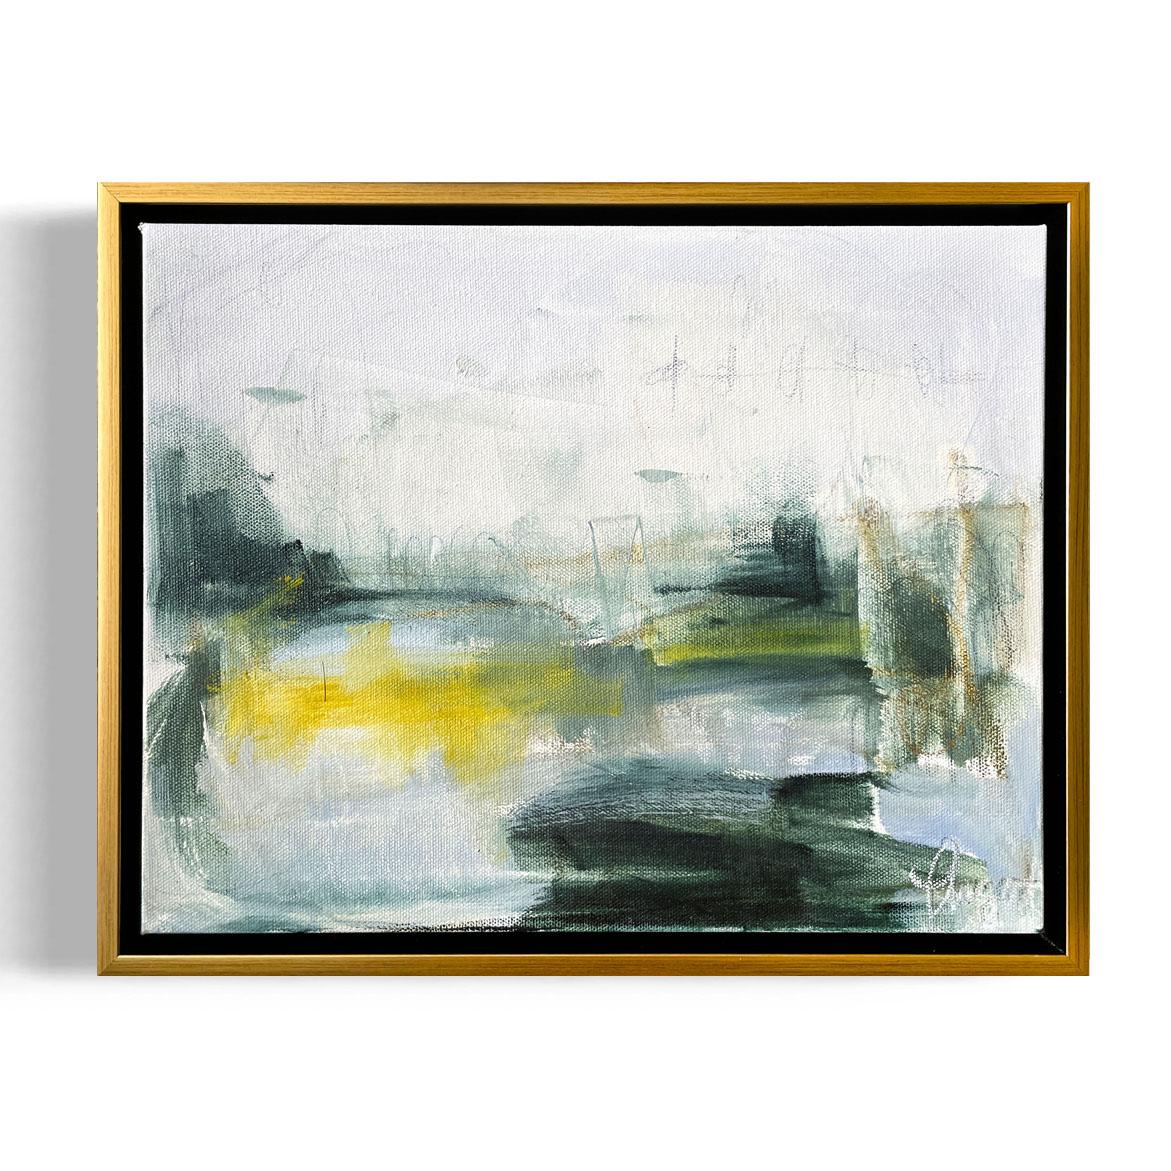 Augusta Wilson Landscape Painting - "Lake No. 3", framed abstract oil painting on canvas